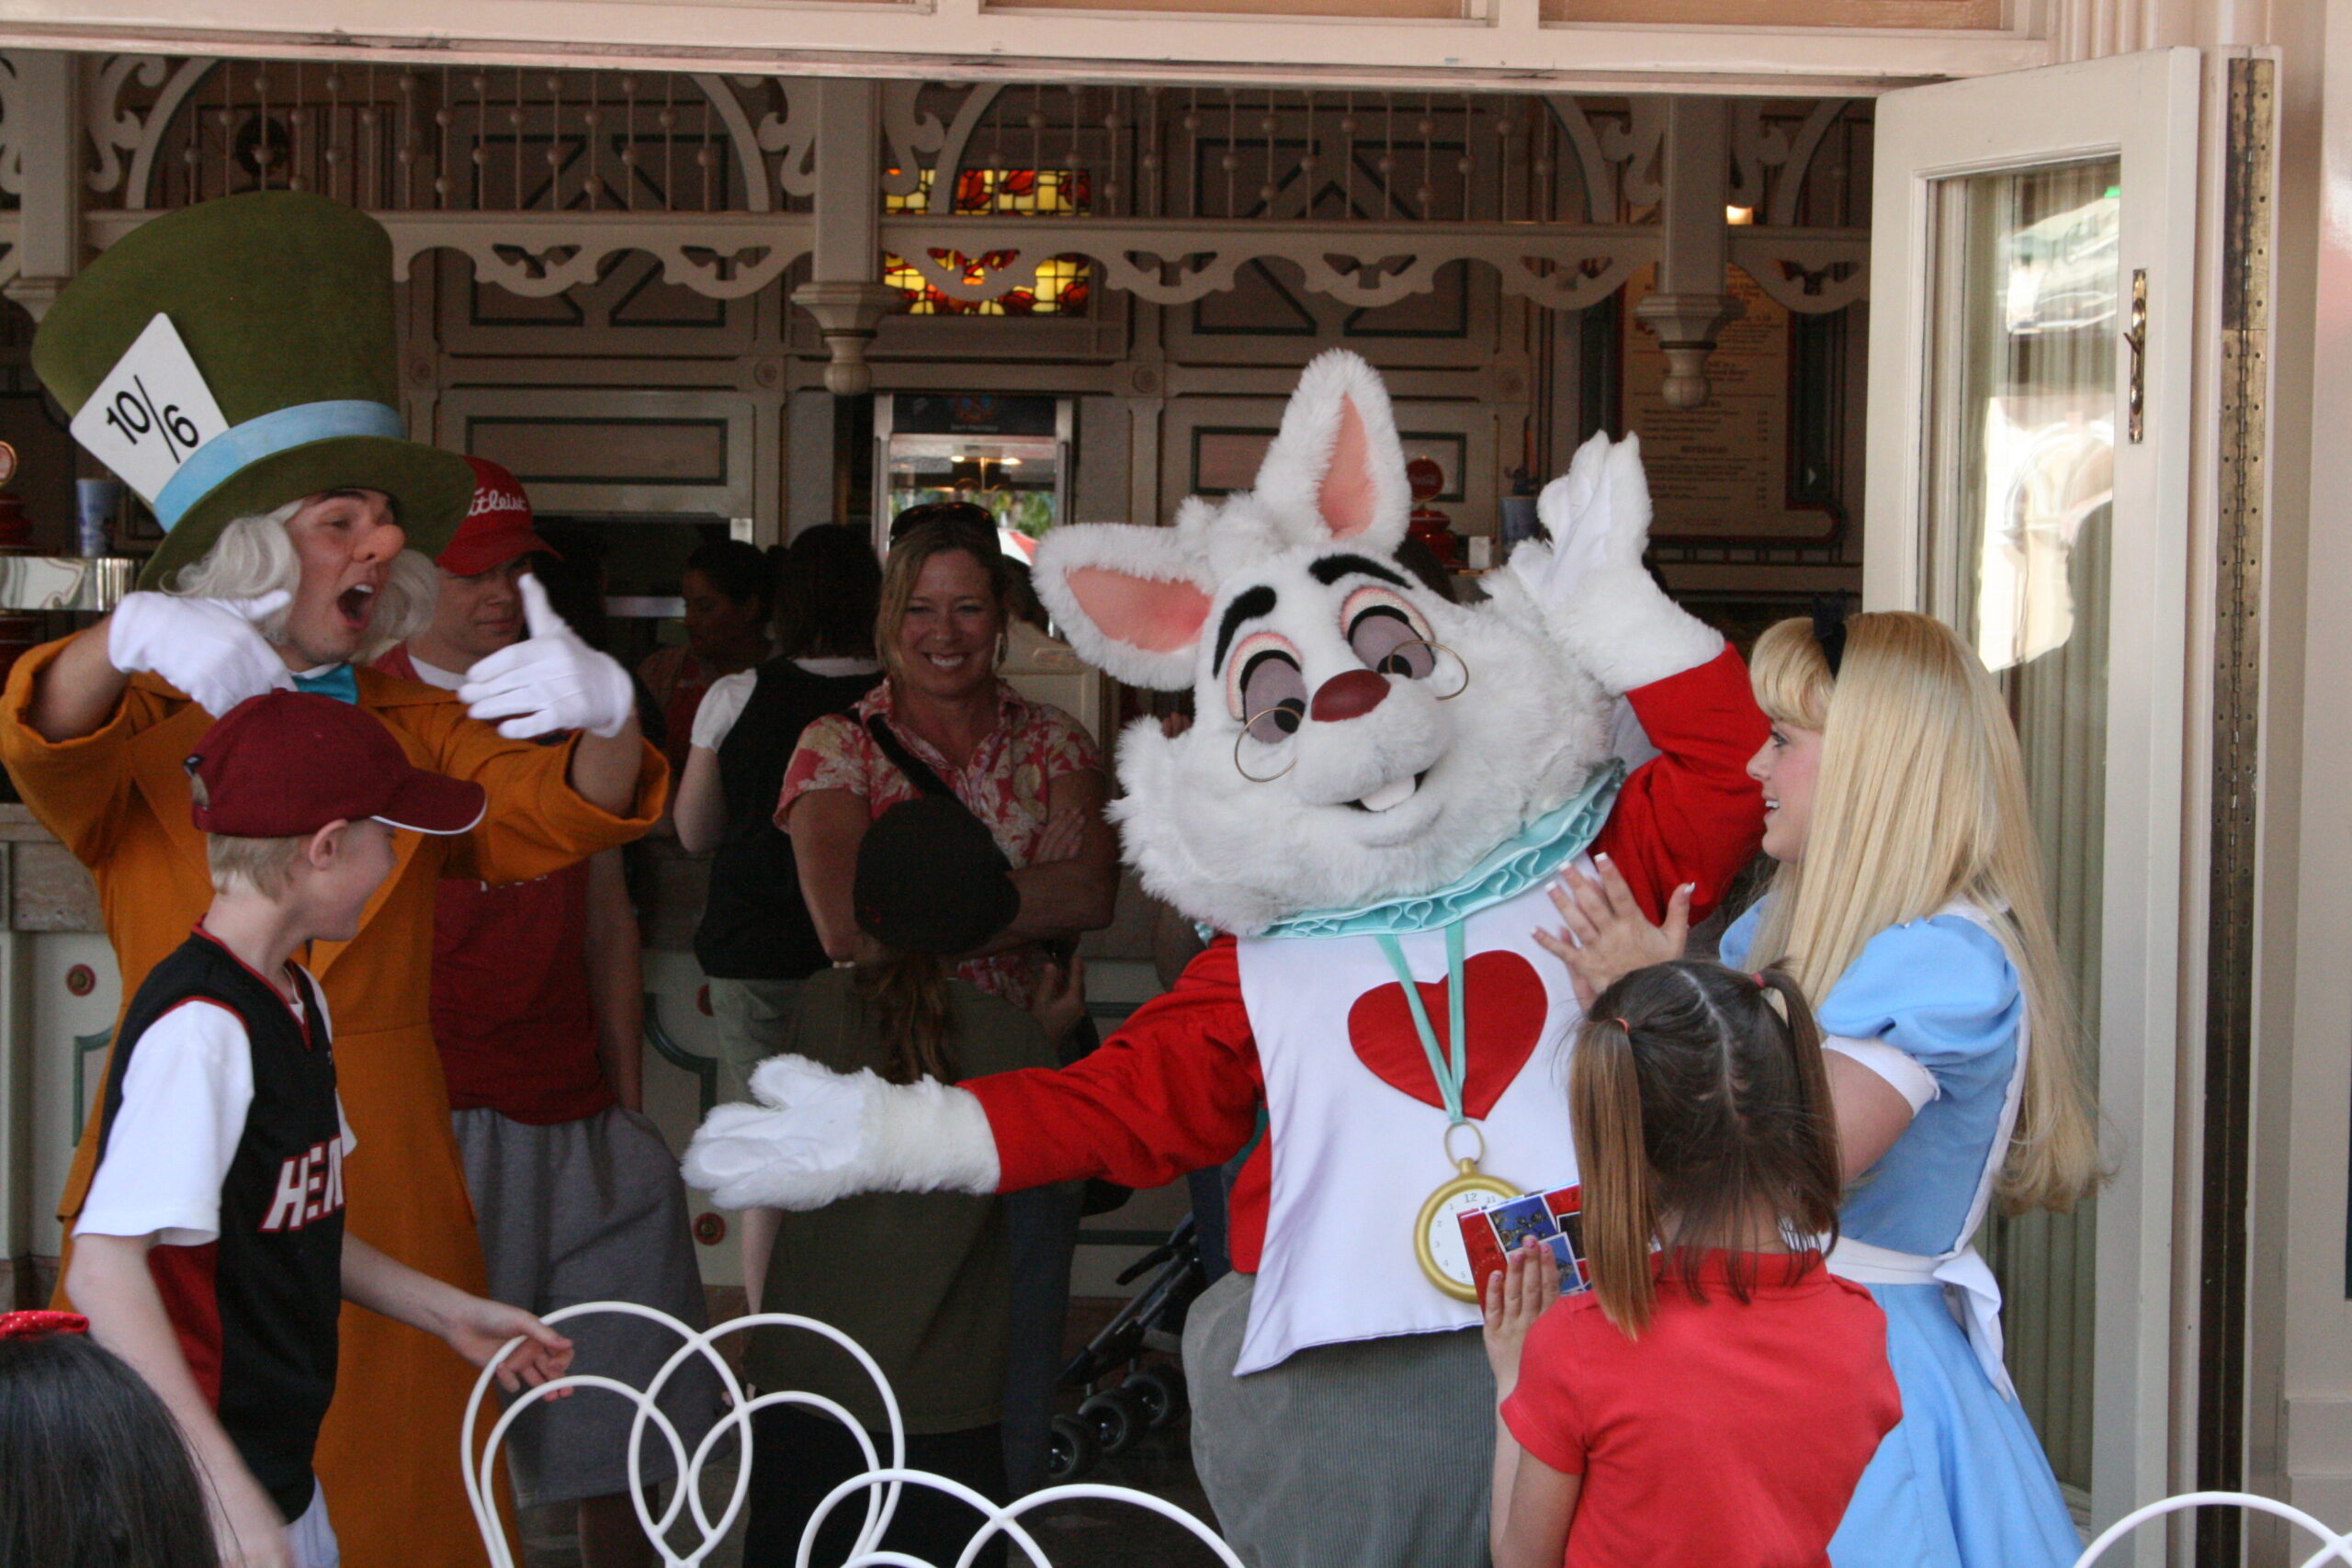 The Mad Hatter, White Rabbit, and Alice play Musical Chairs with children at Disneyland.